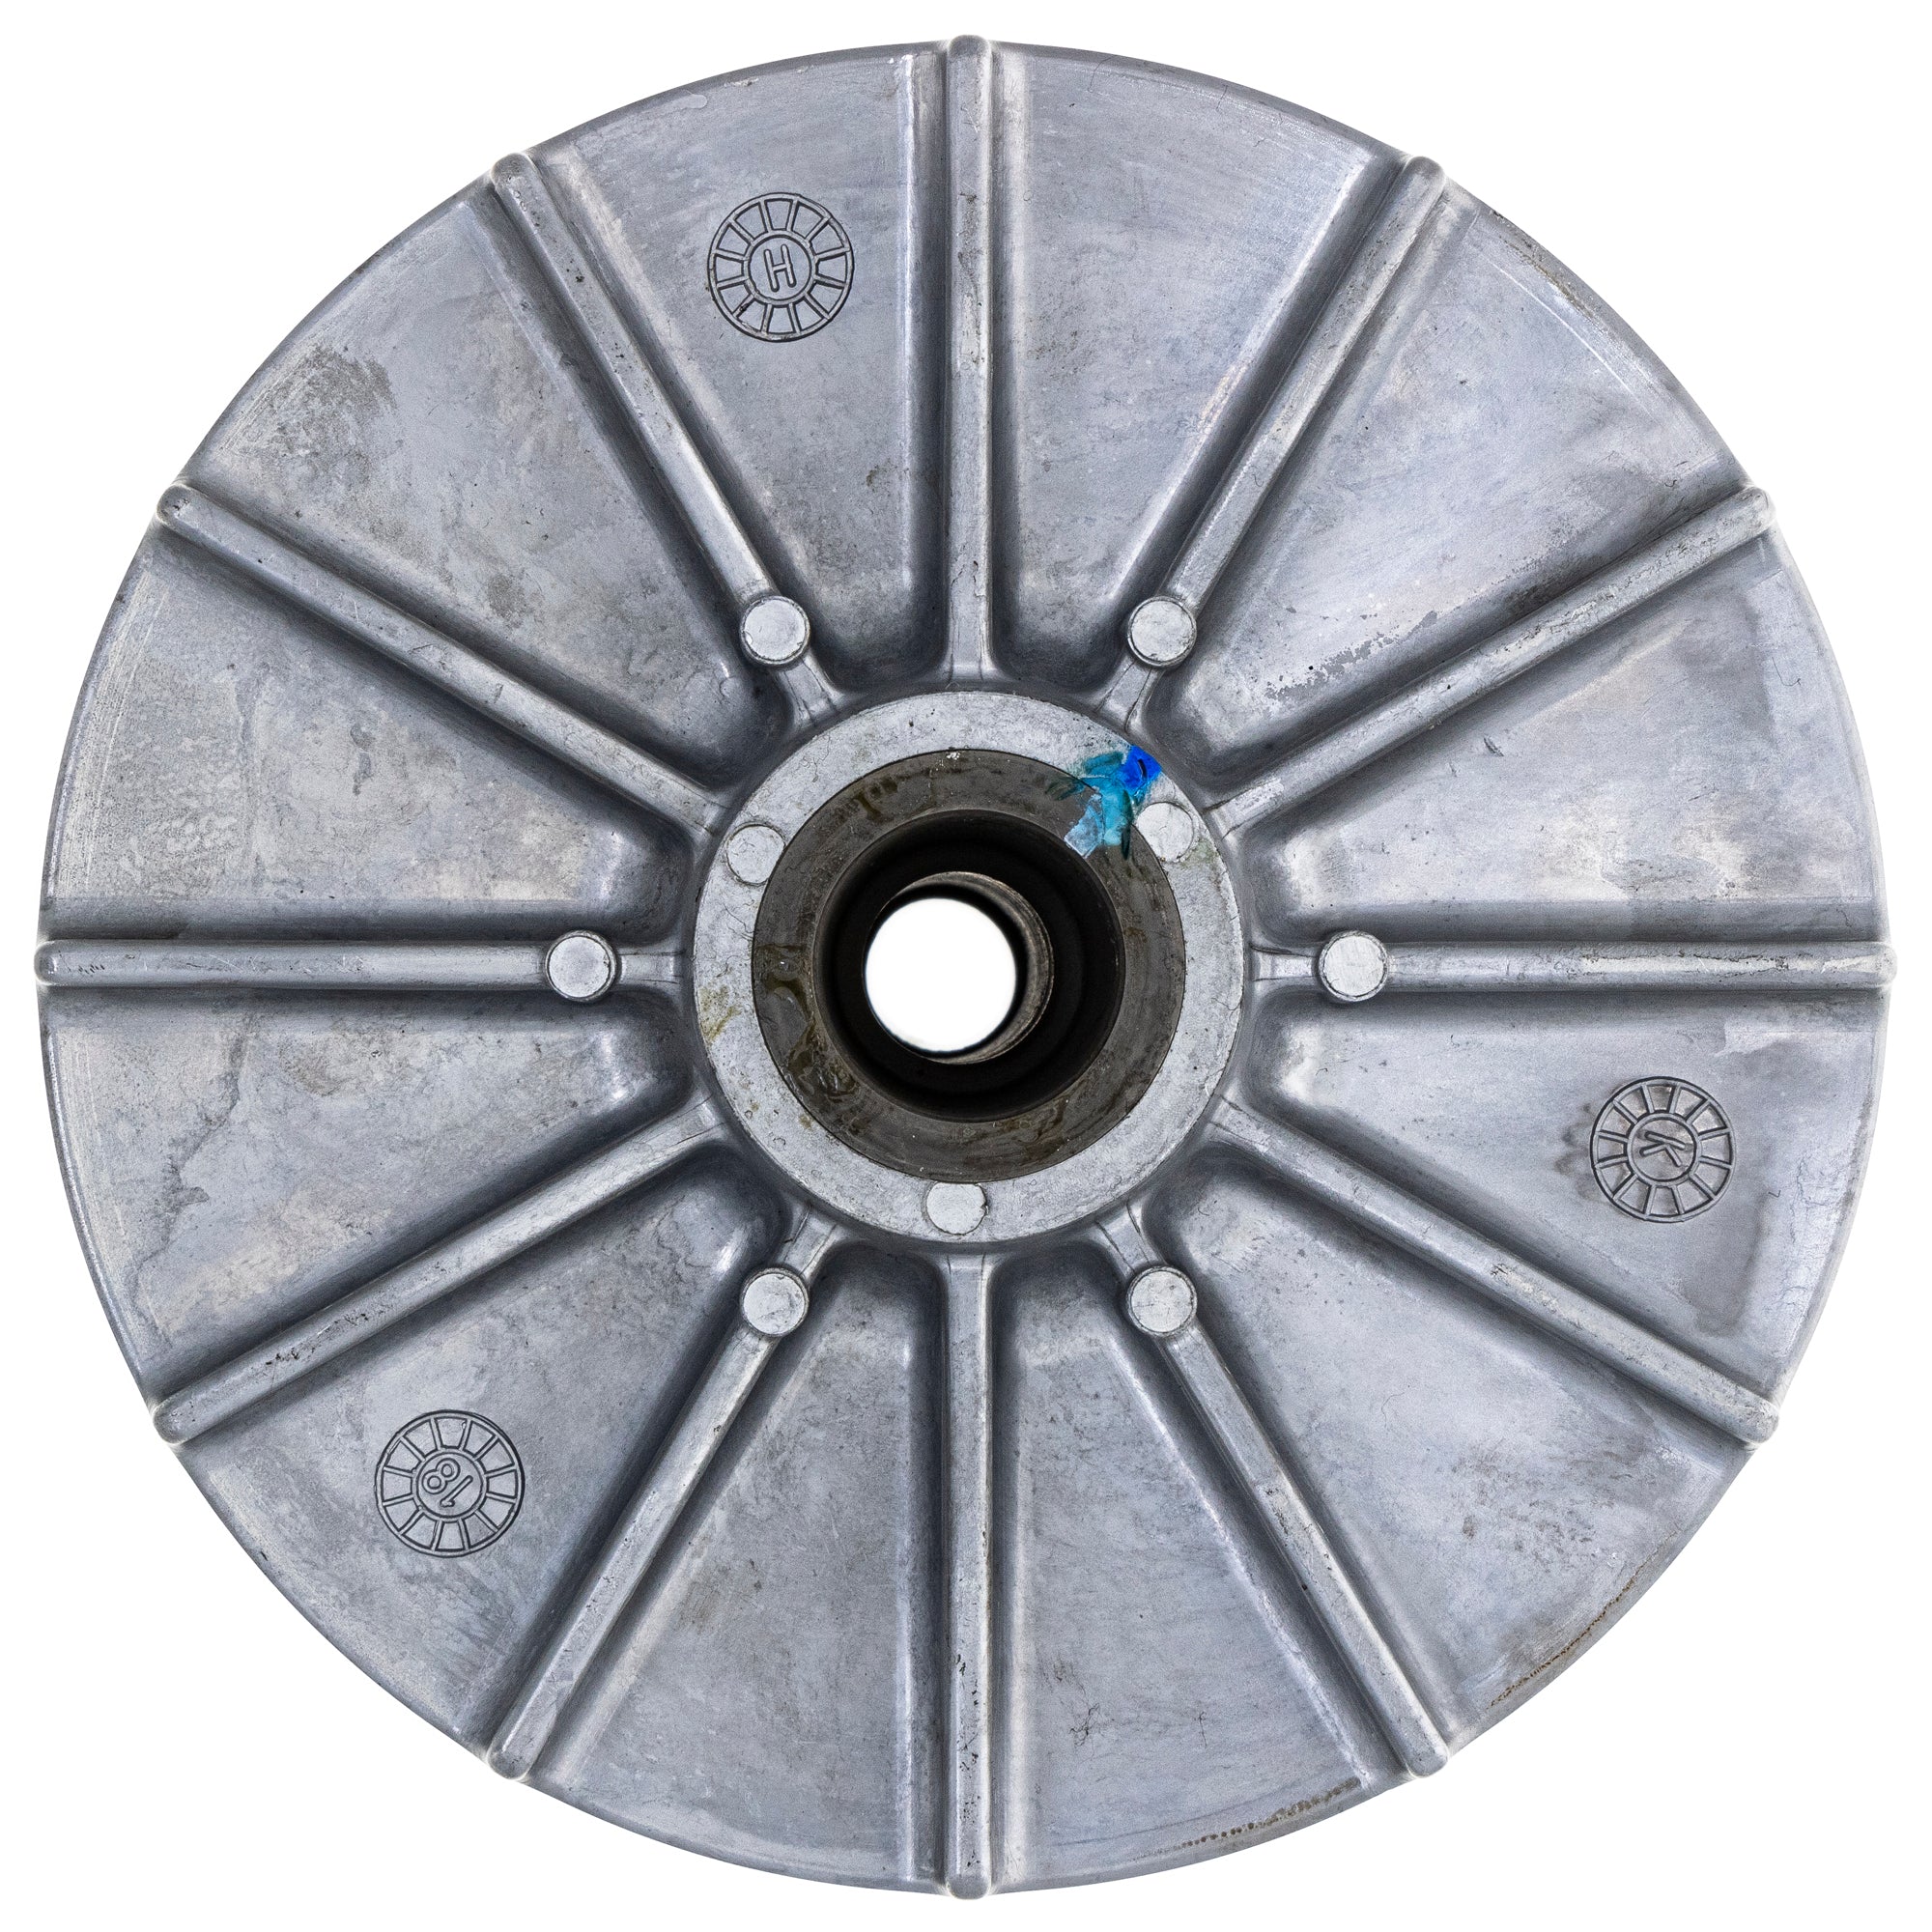 Primary Drive Clutch For Polaris 1321706